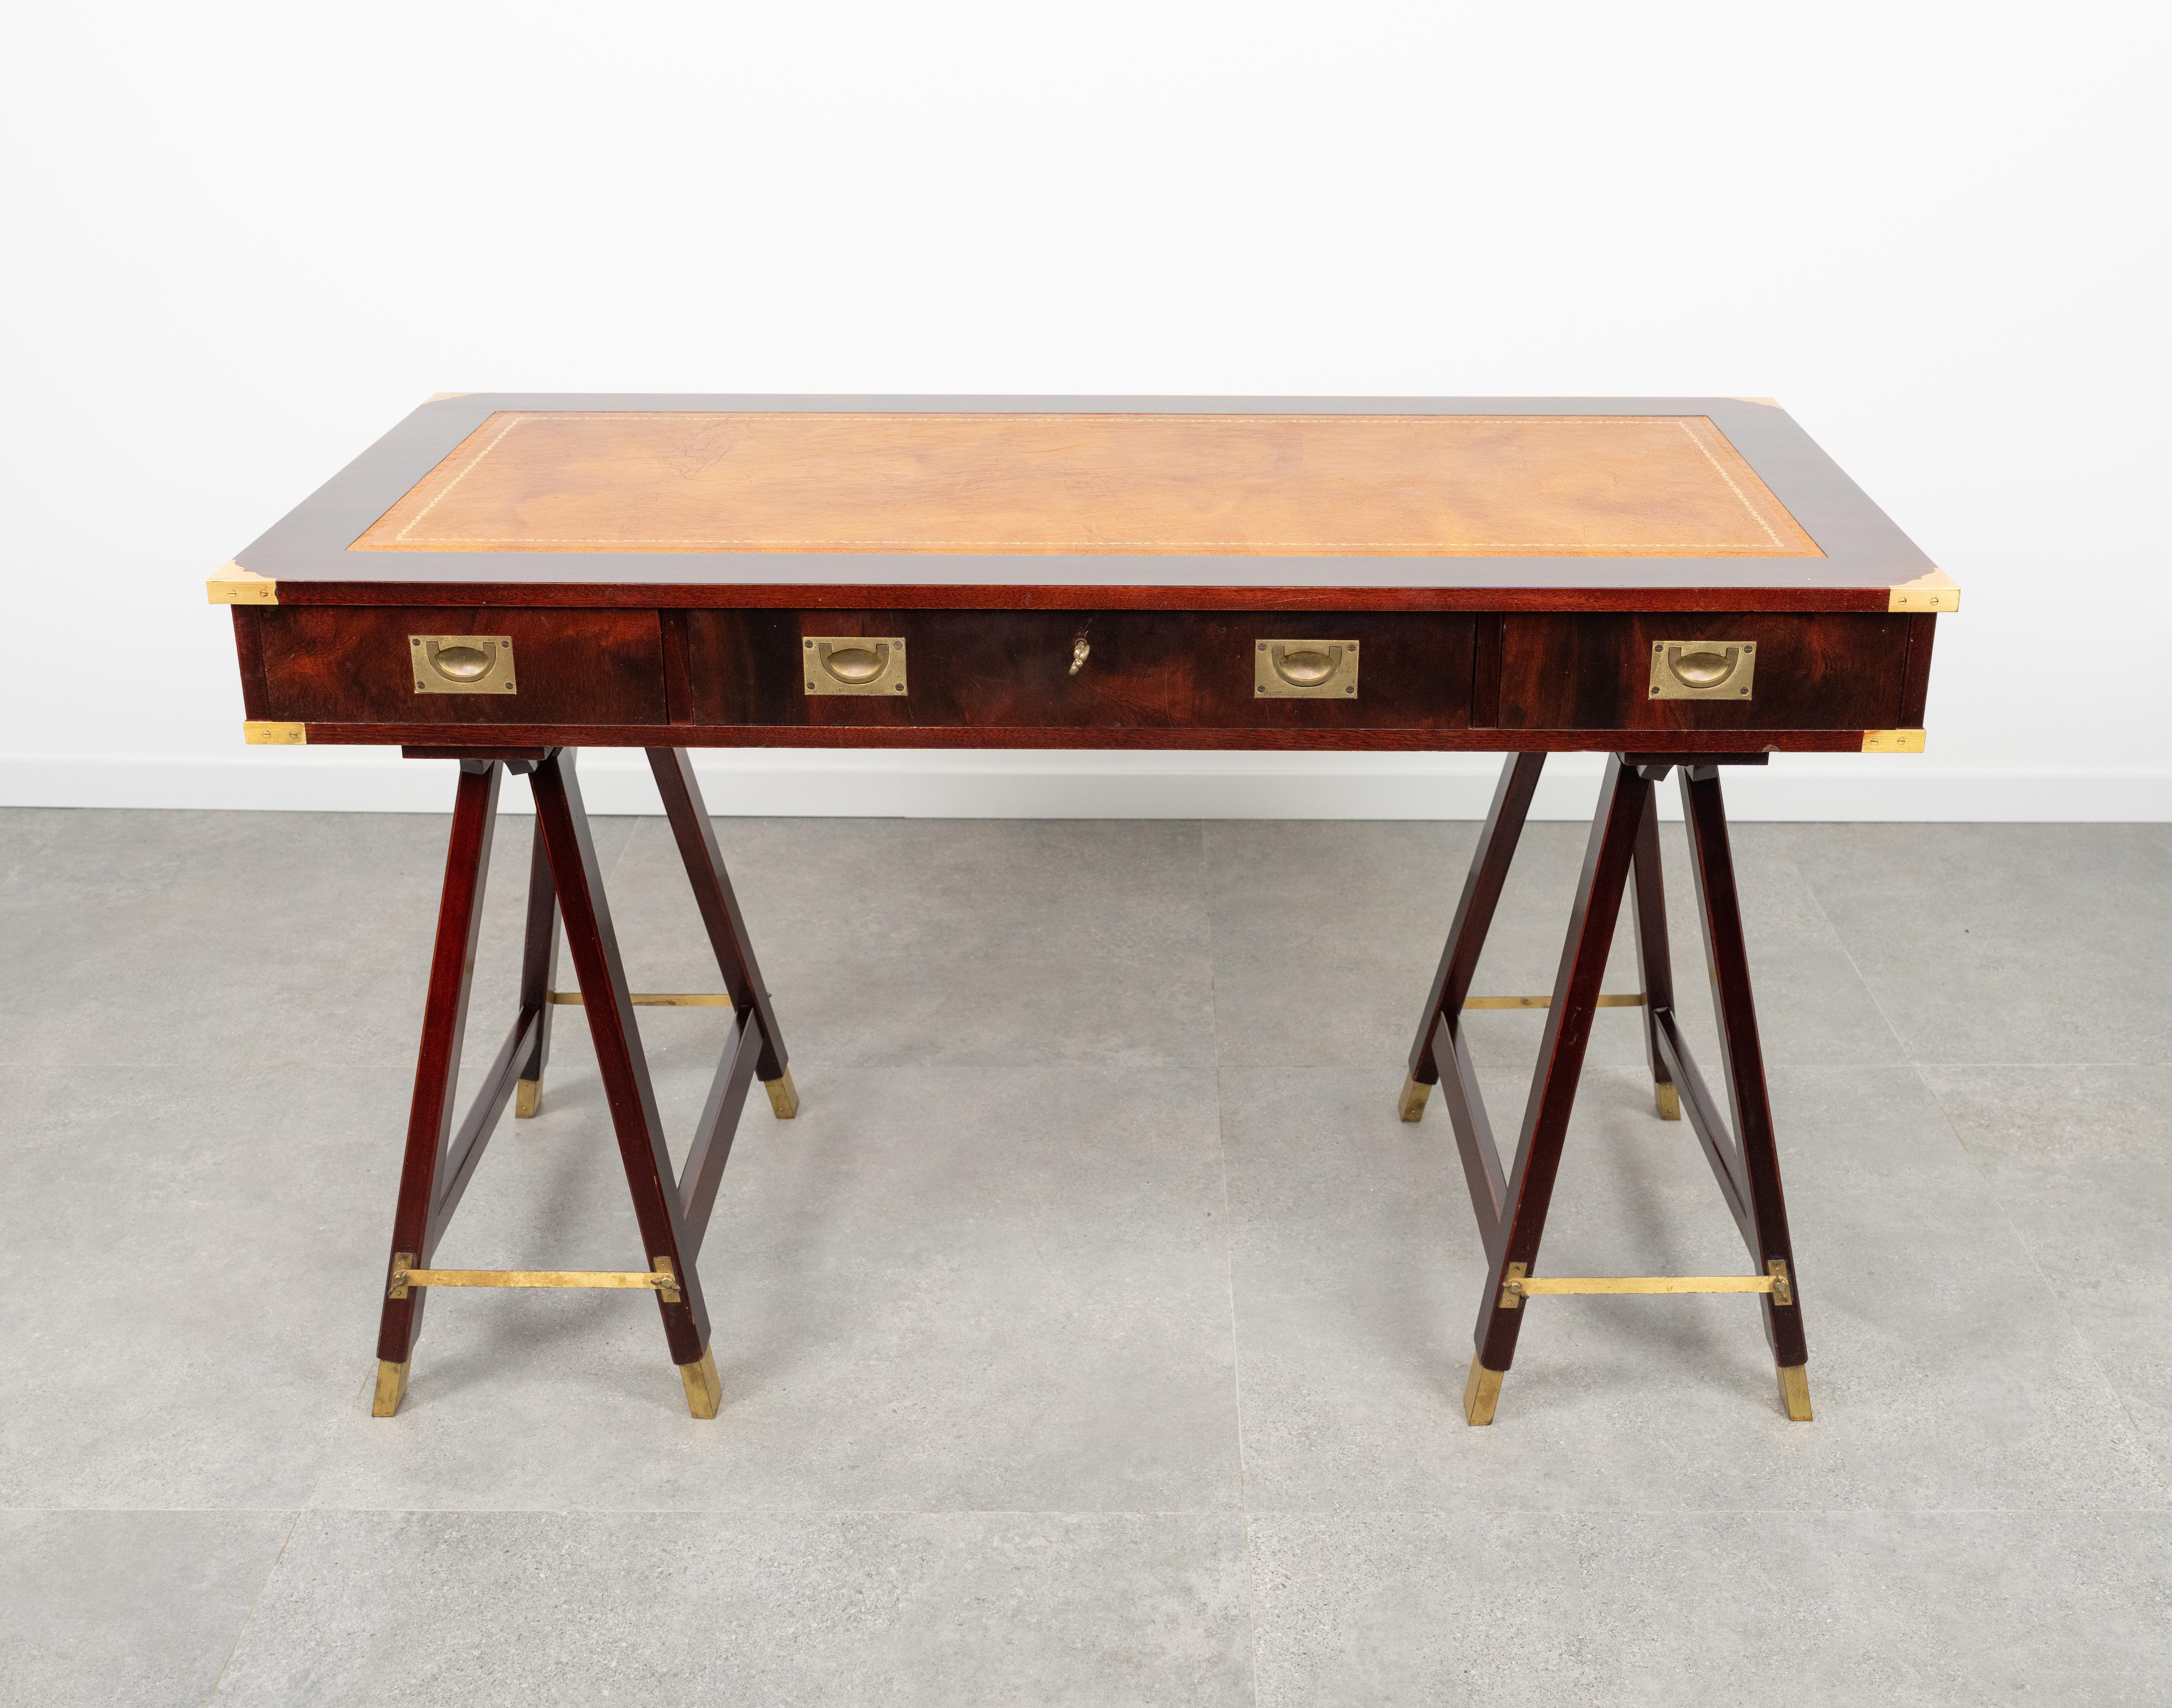 Metal Military Campaign Style Desk Table in Wood, Brass and Leather, Italy 1960s For Sale